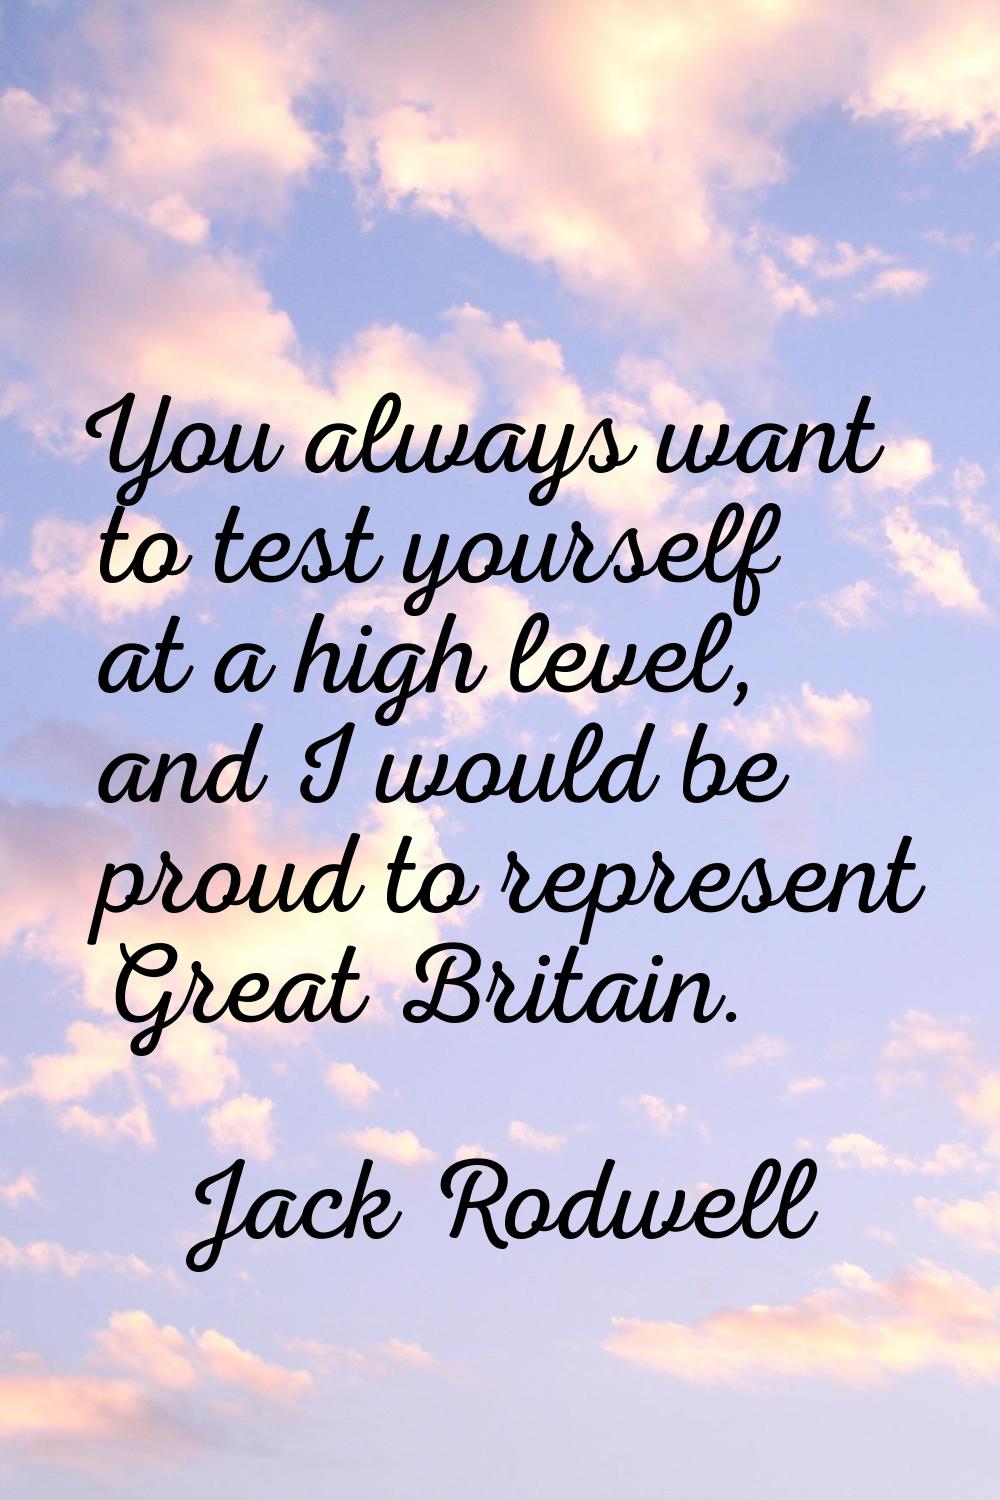 You always want to test yourself at a high level, and I would be proud to represent Great Britain.